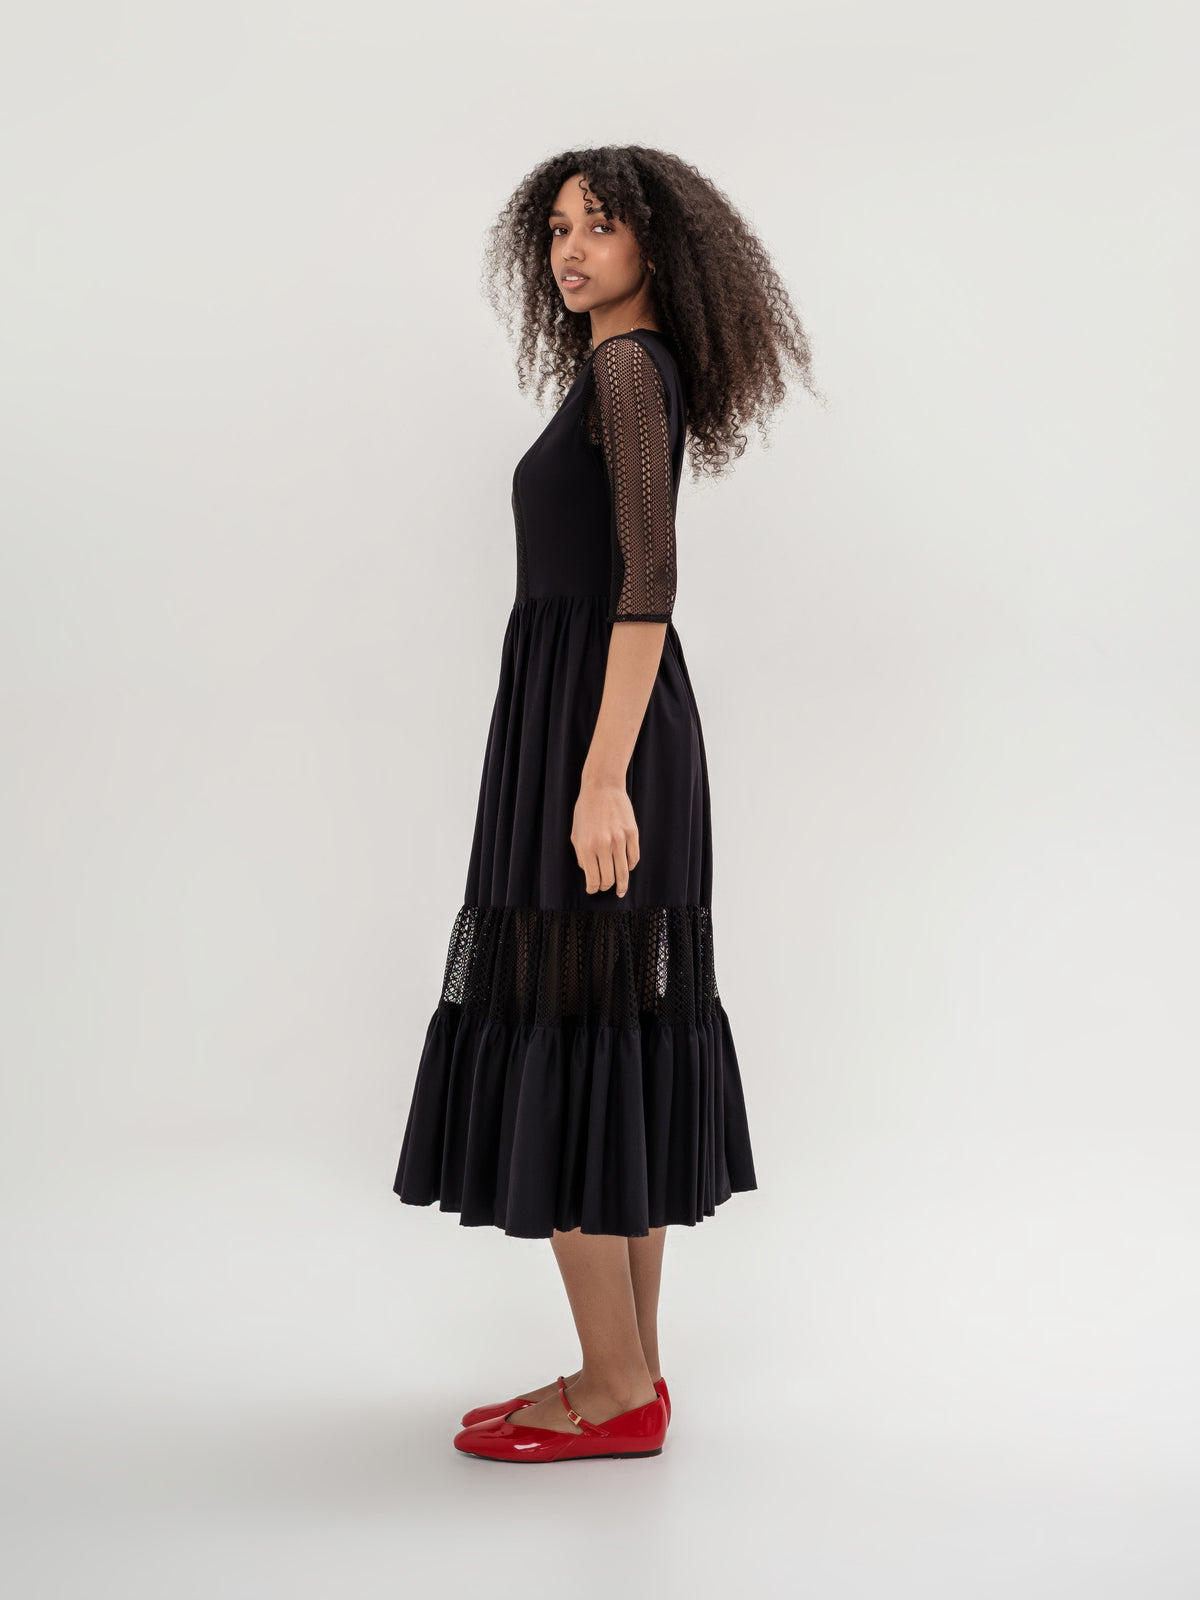 Black midi dress with lace accents 3/4 sleeve fitted top